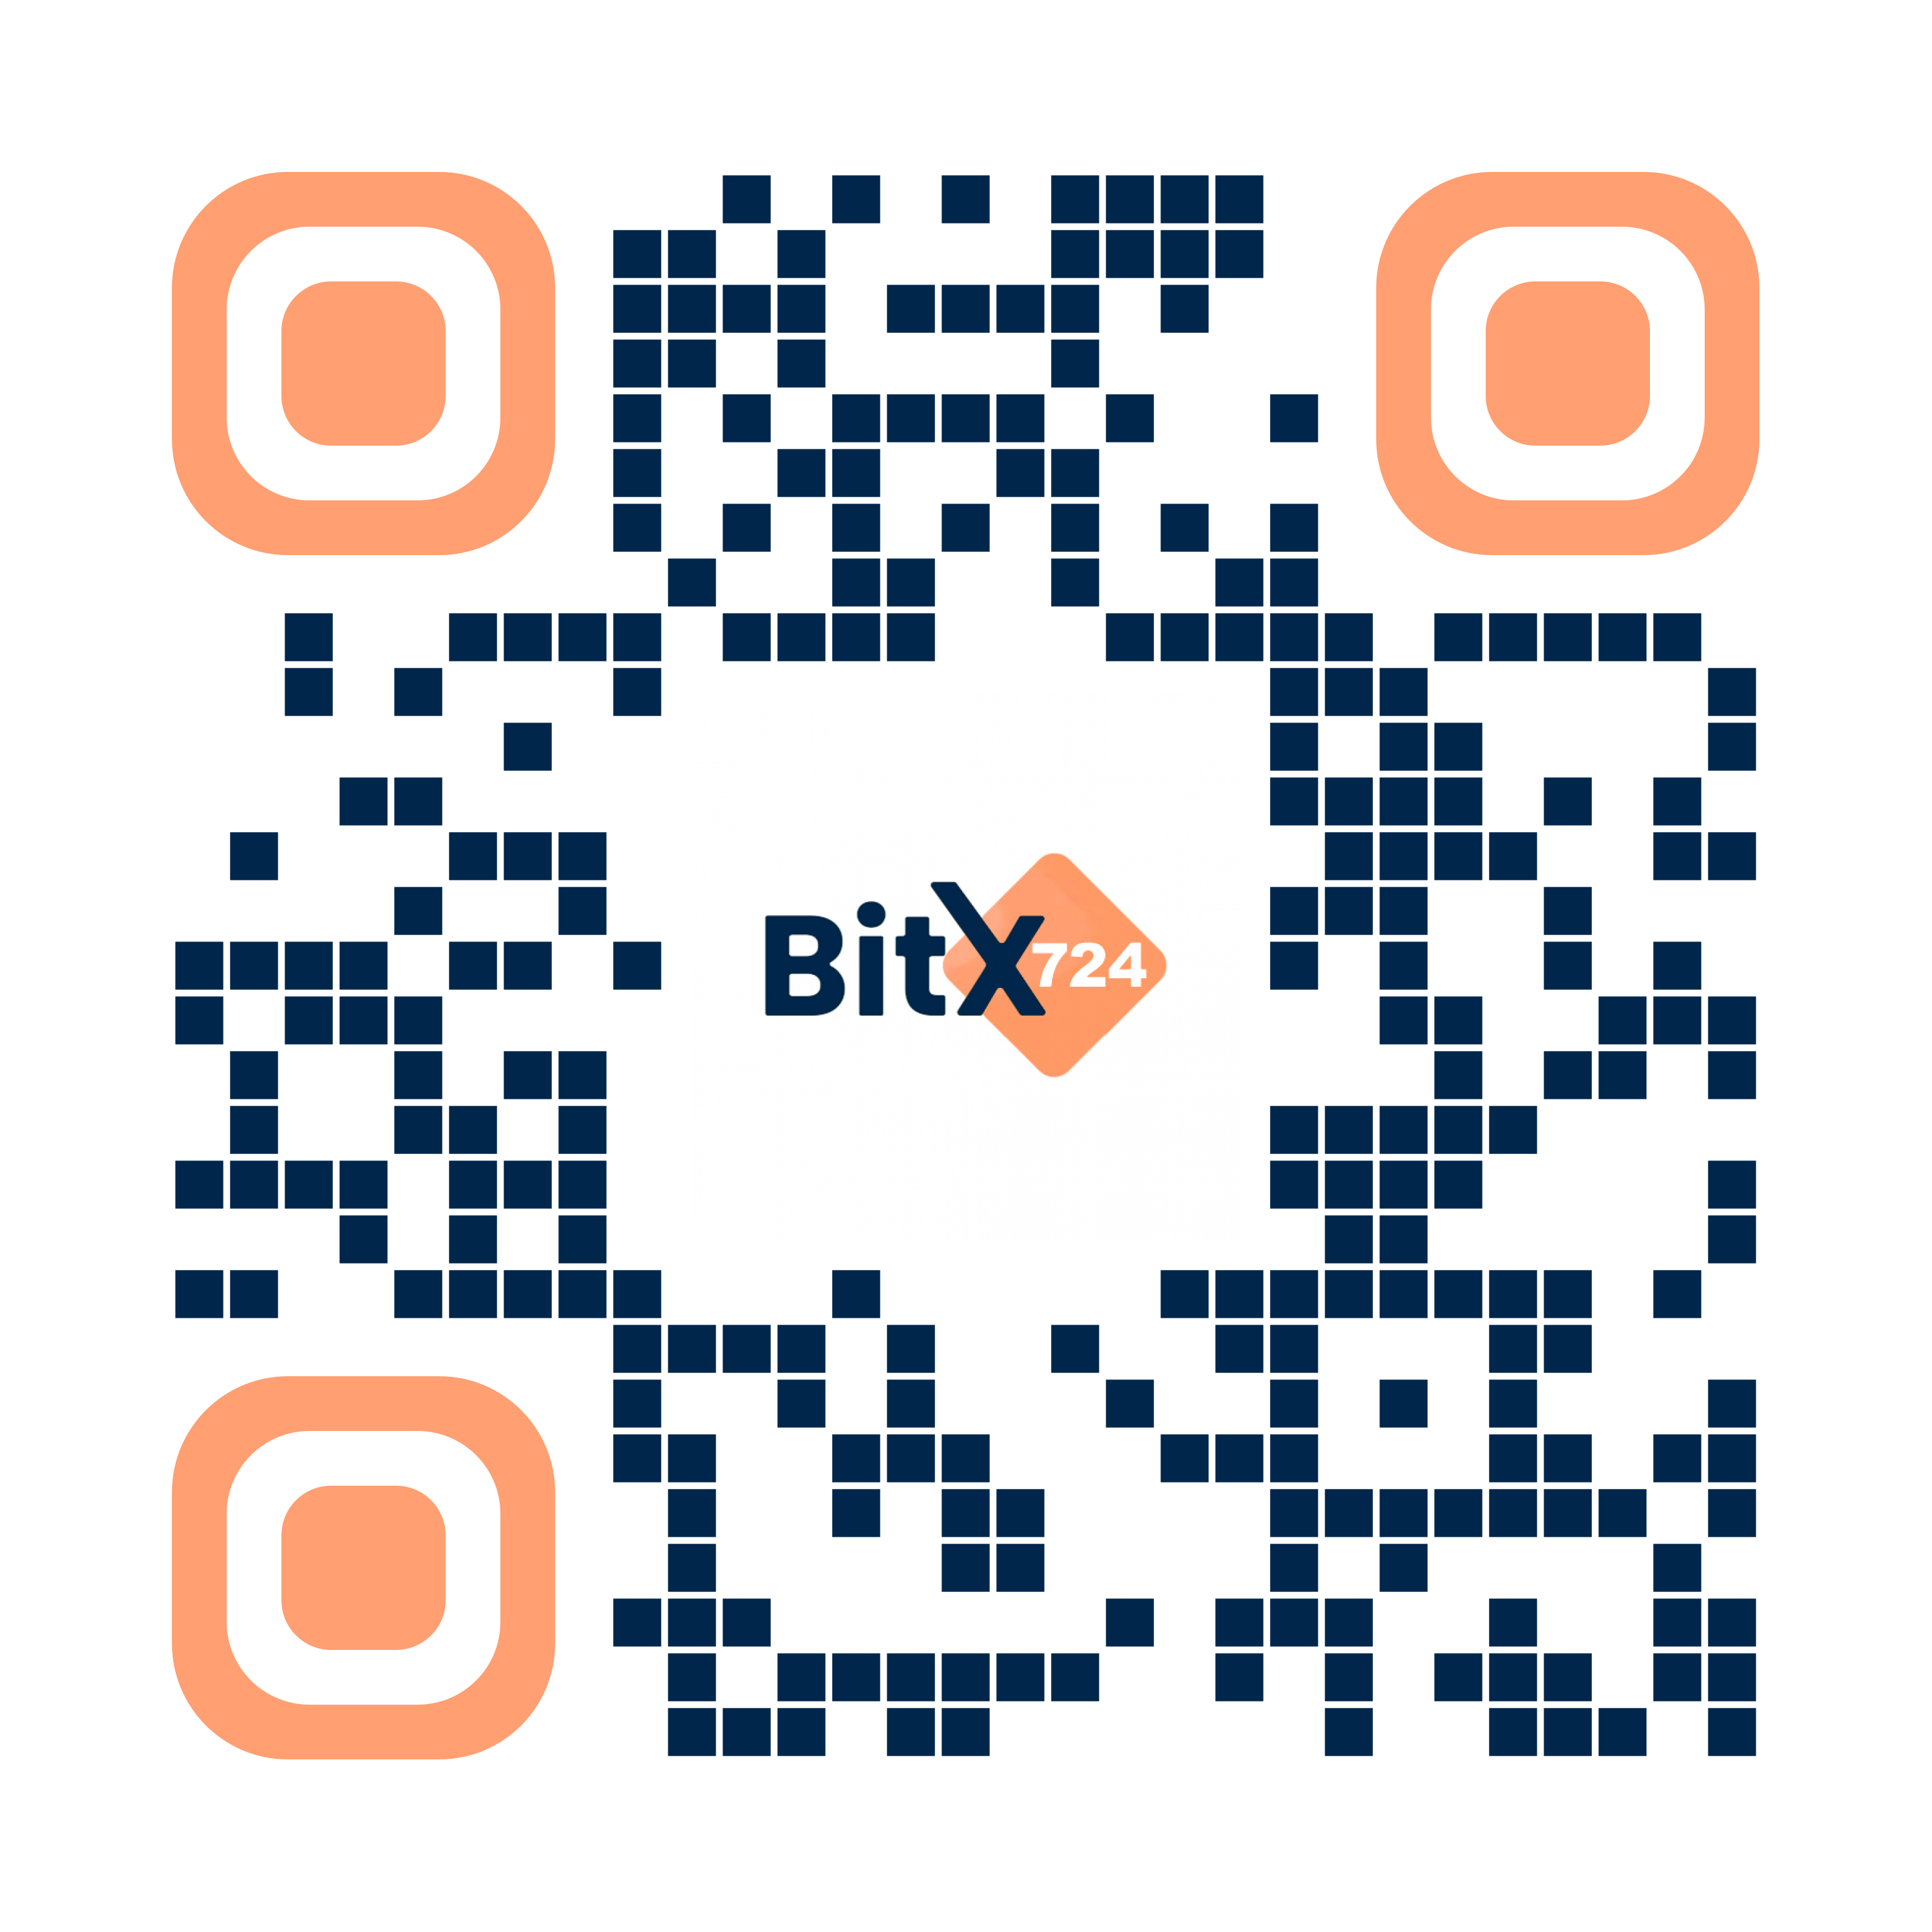 BarCode For Download App Bitx724